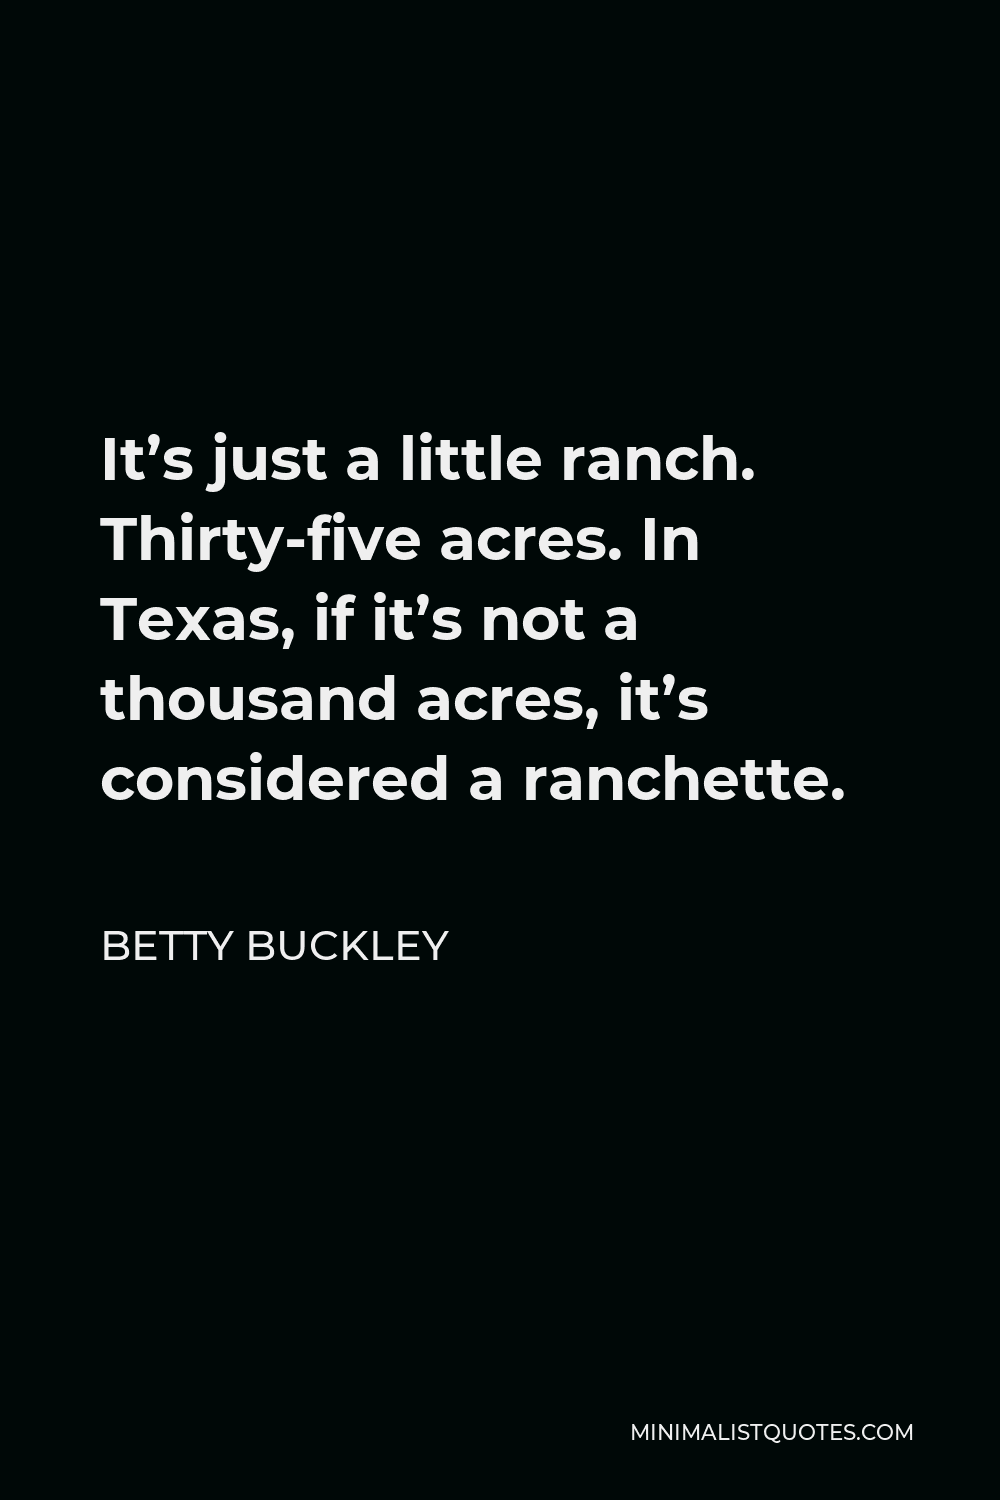 Betty Buckley Quote - It’s just a little ranch. Thirty-five acres. In Texas, if it’s not a thousand acres, it’s considered a ranchette.